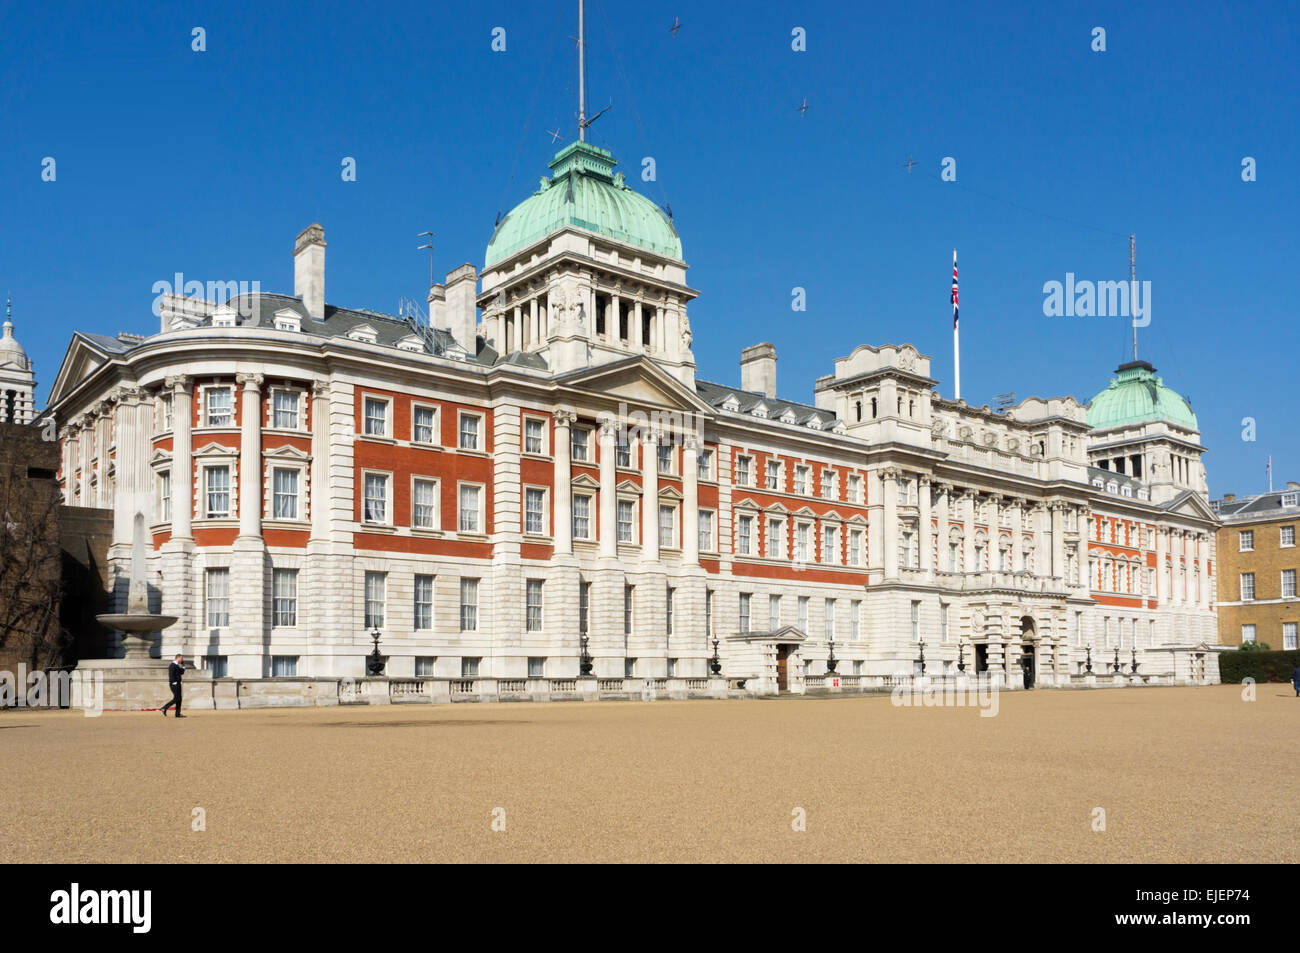 Admiralty House, the old Admiralty Building on north side of Horseguards Parade in central London. Stock Photo